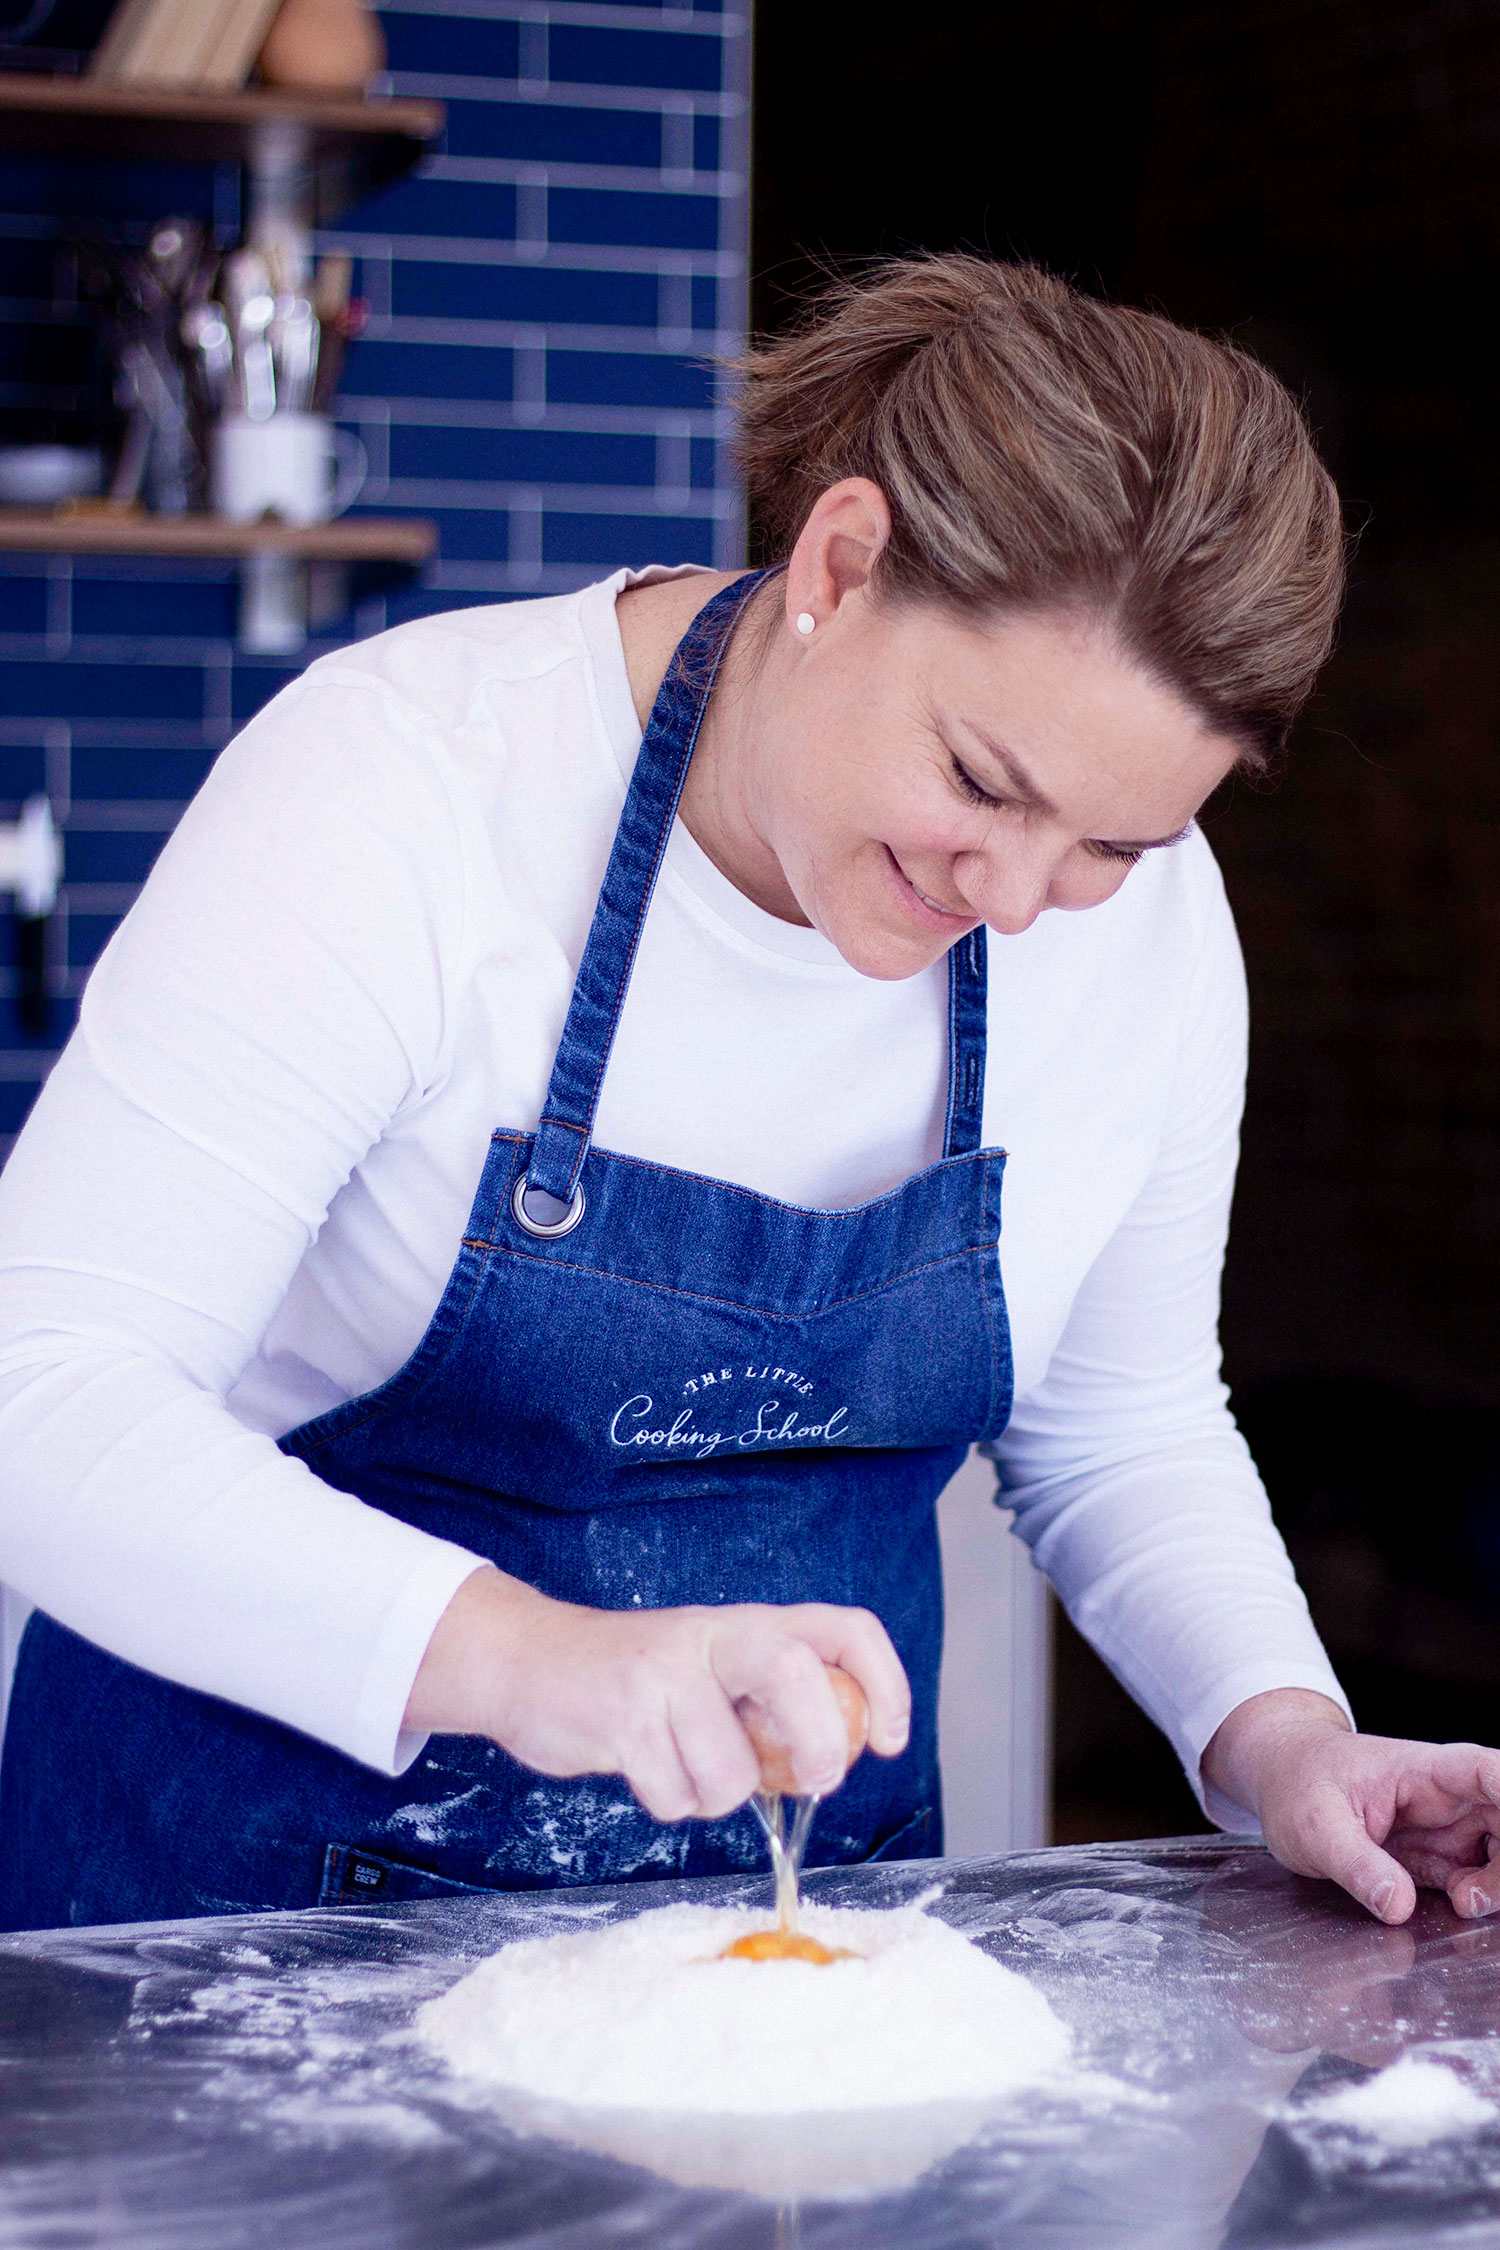 Artisan chef and owner of The Little Cooking School in Mudgee, Tamara Howorth